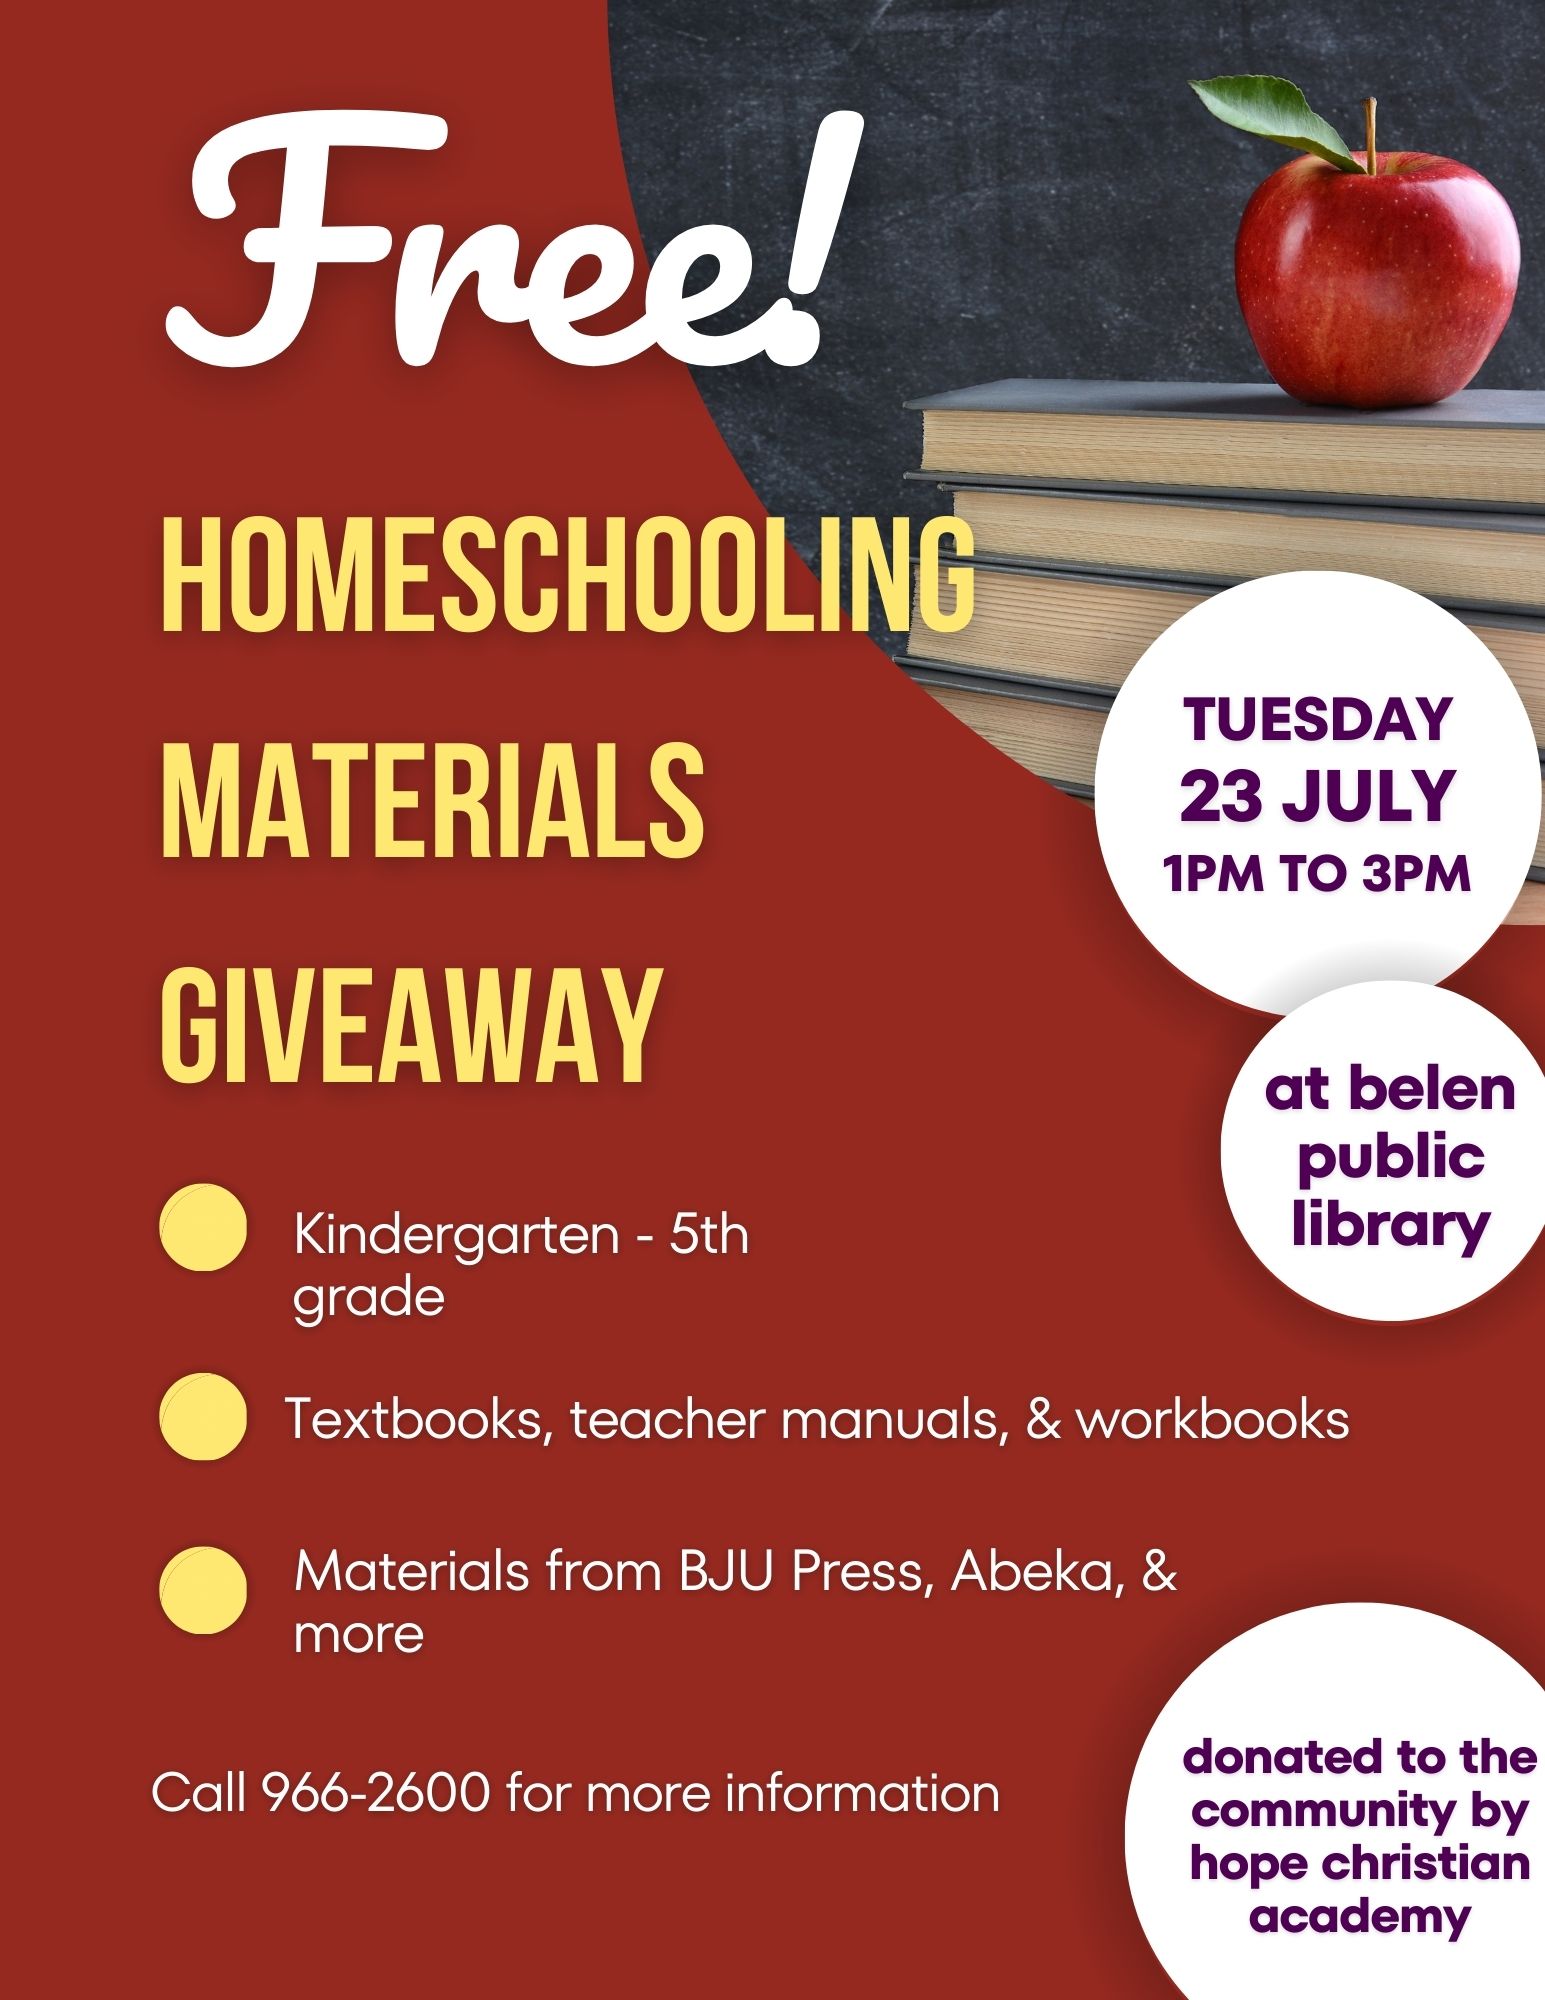 Featured image for “Free Homeschooling Materials Giveaway”